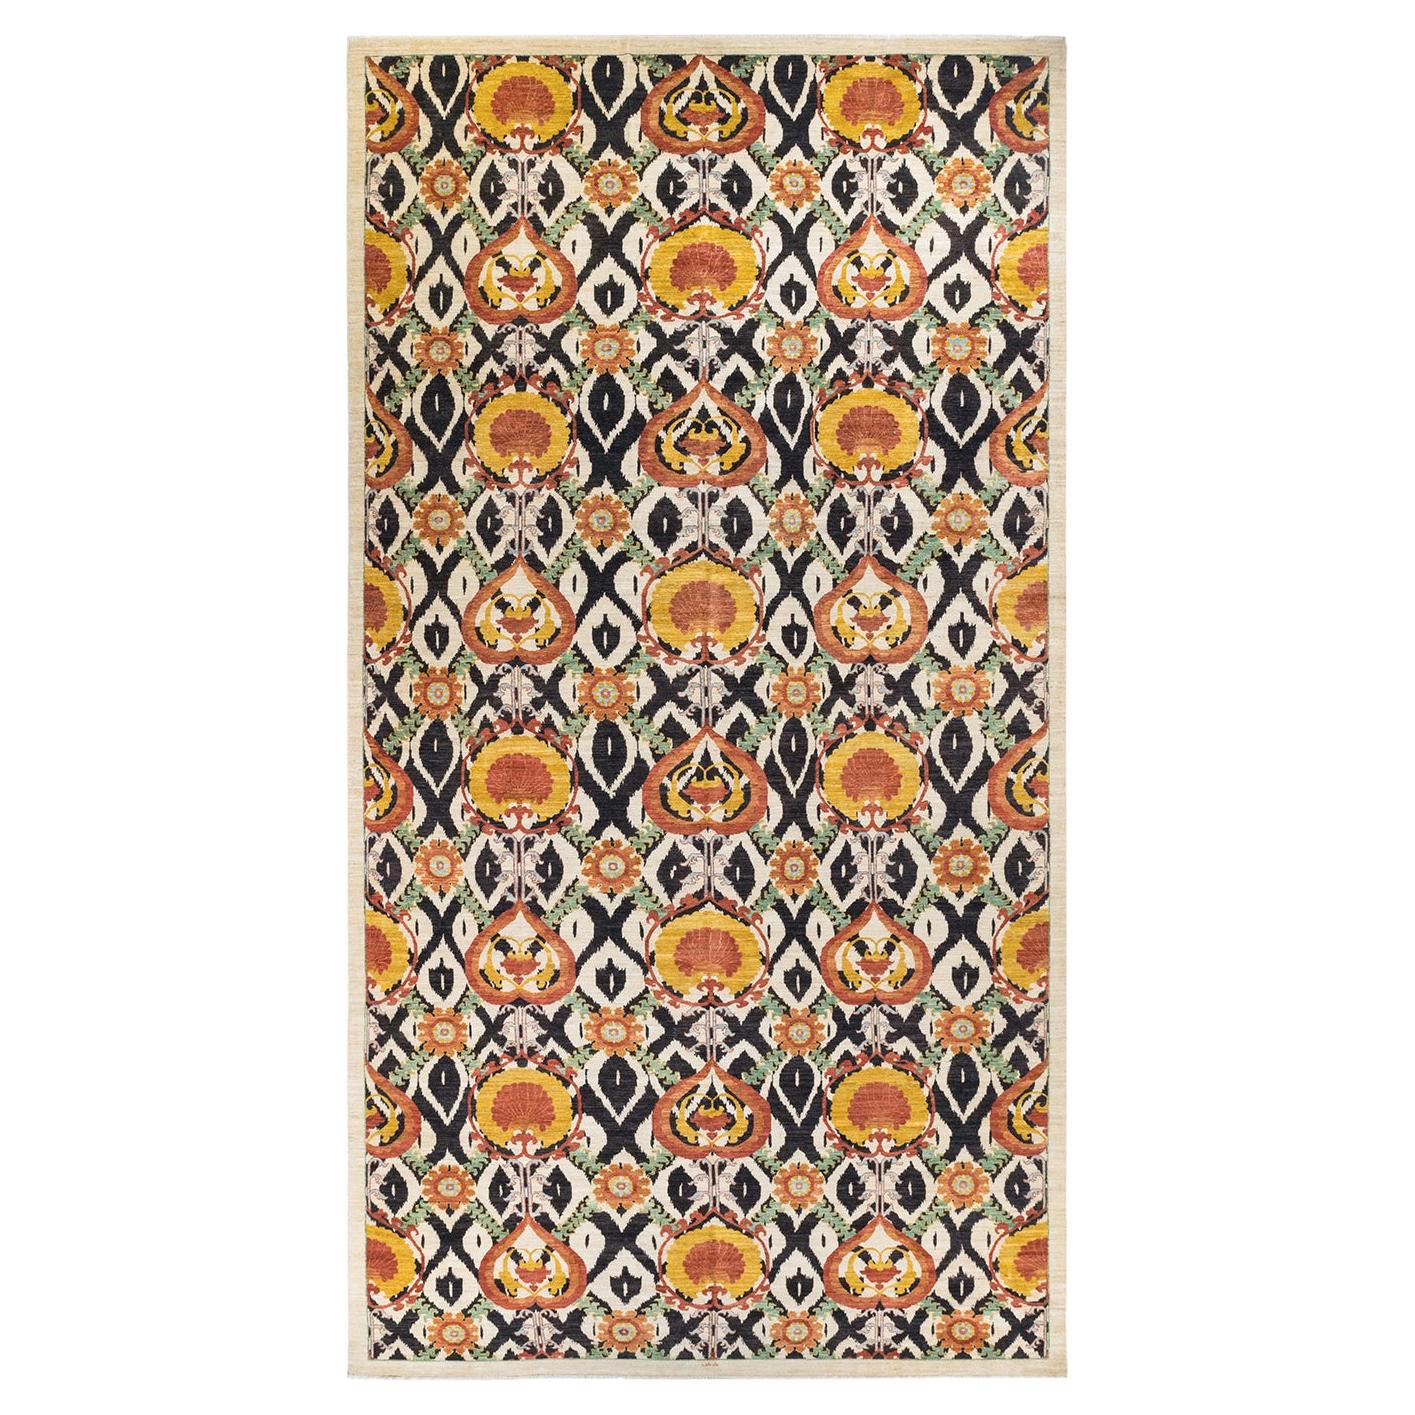 Suzani, One-of-a-Kind Hand-Knotted Area Rug, Ivory